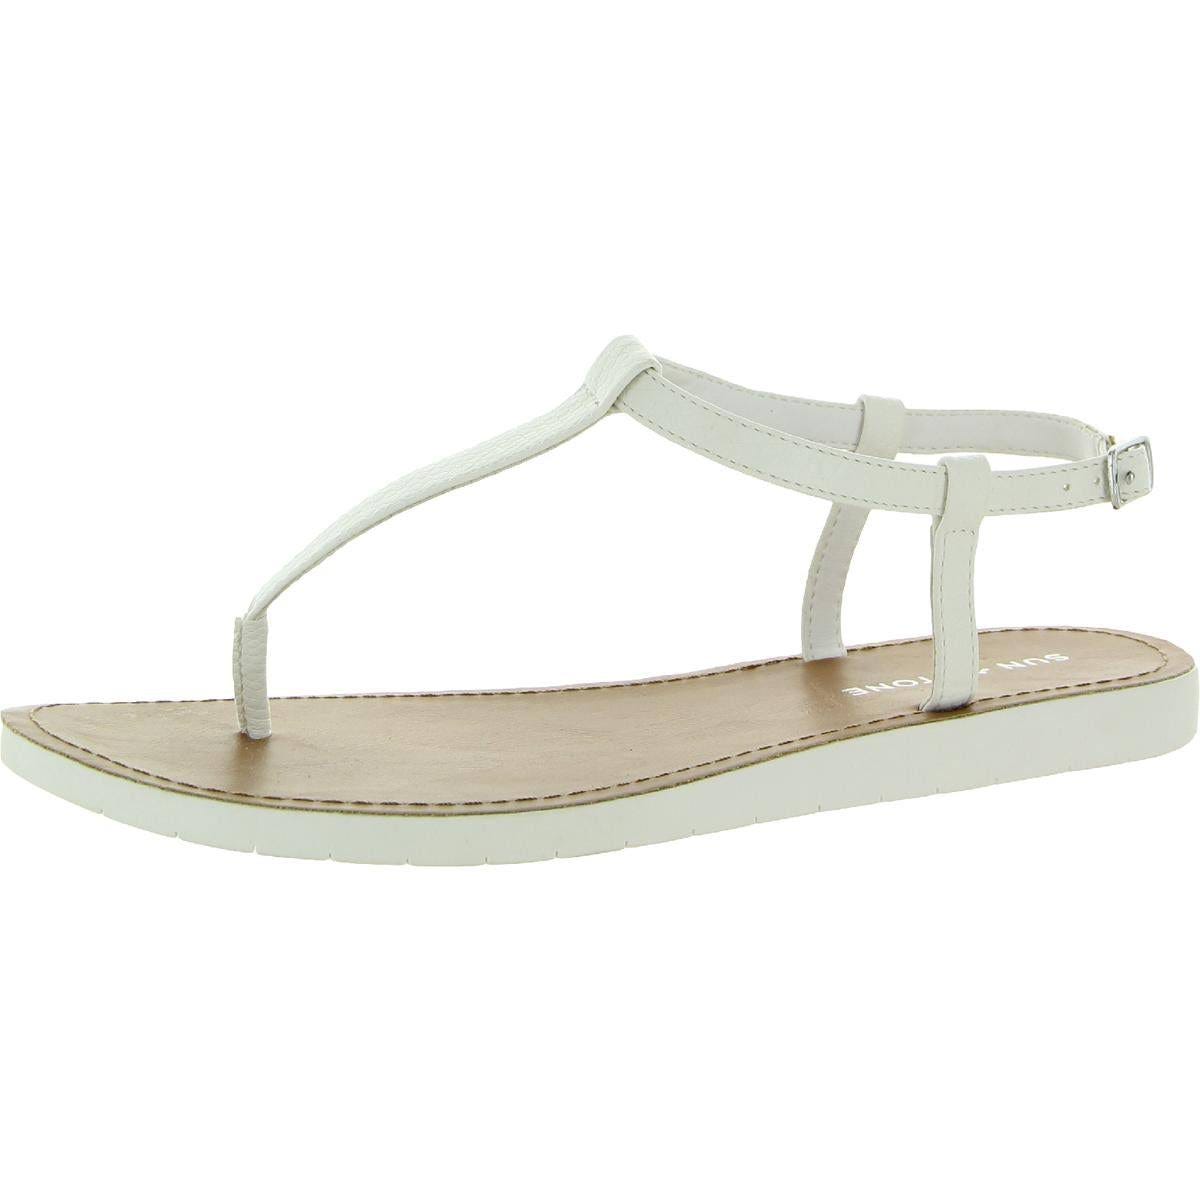 Fashionable Thong Sandals for Summer | Image